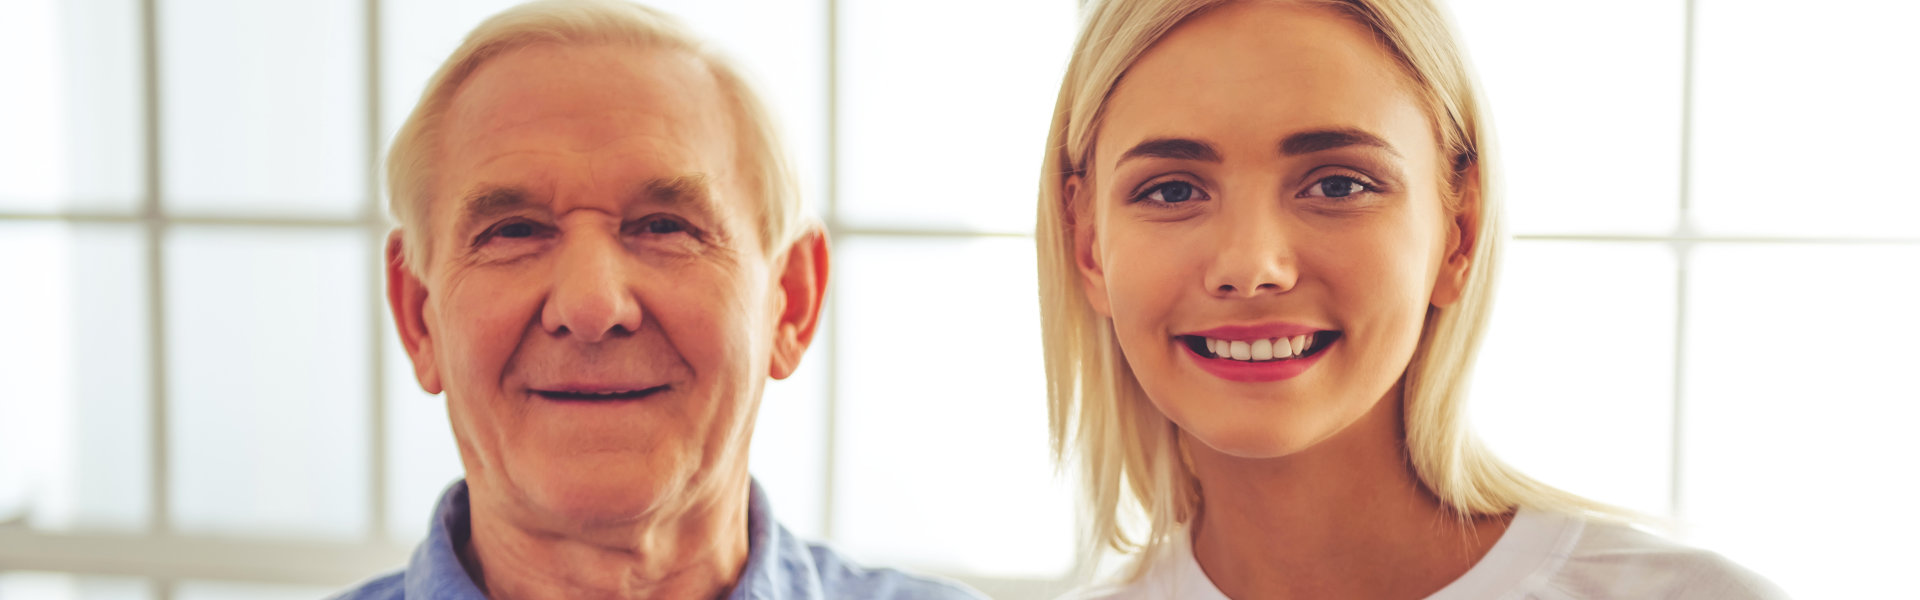 elderly man and woman smiling